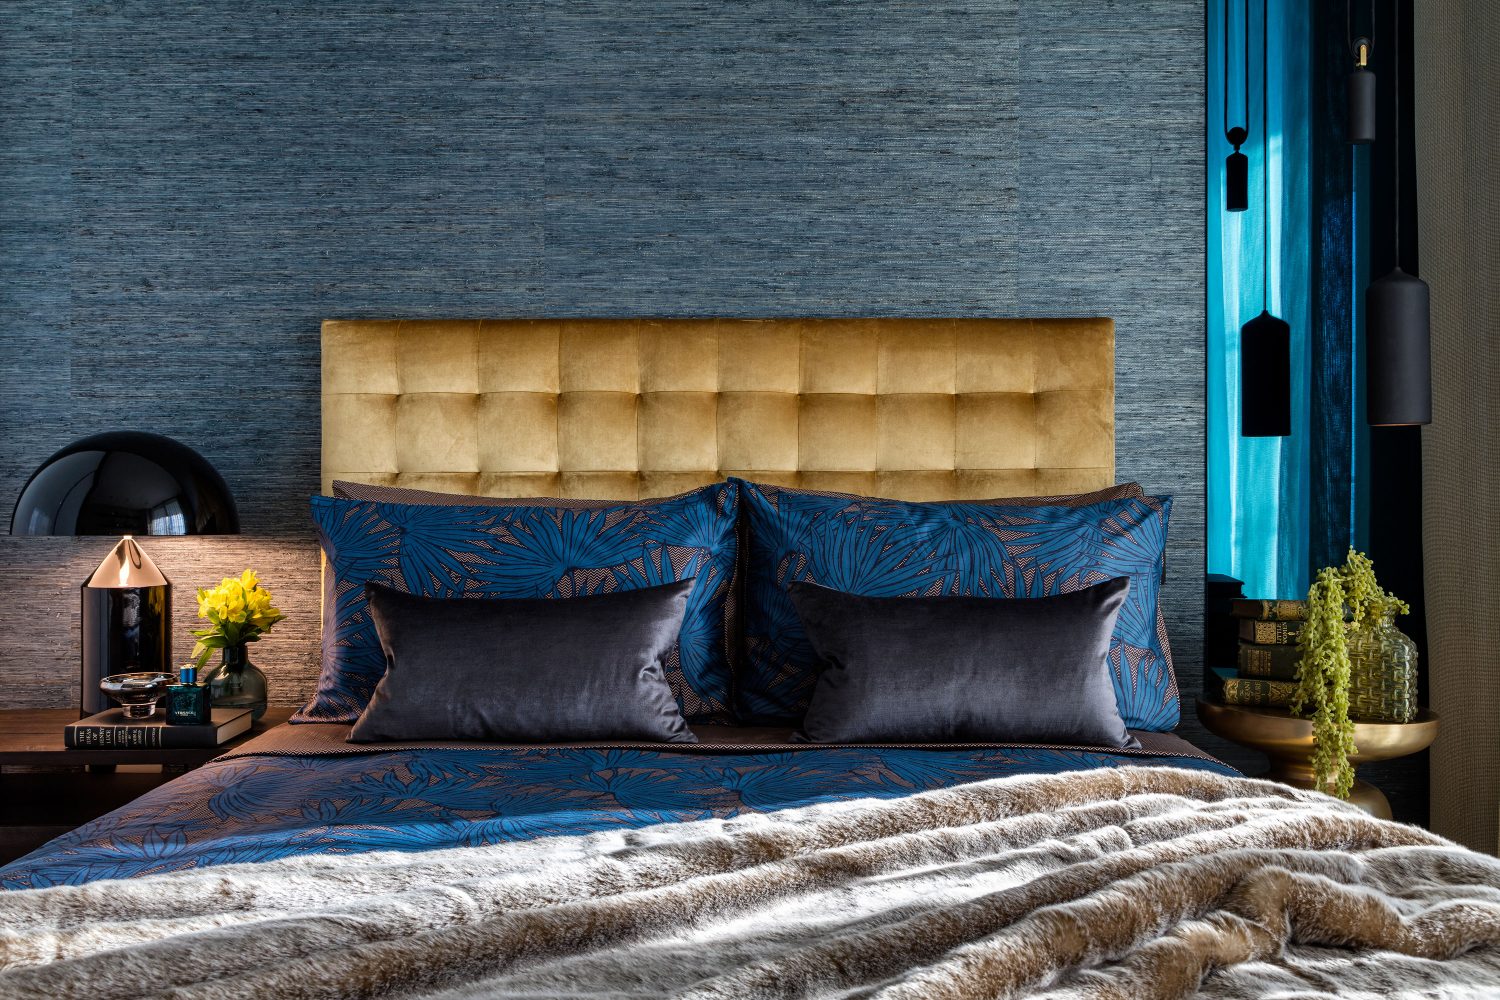 Daniel Hopwood Dollar Bay penthouse design. Blue bedroom with gold accents